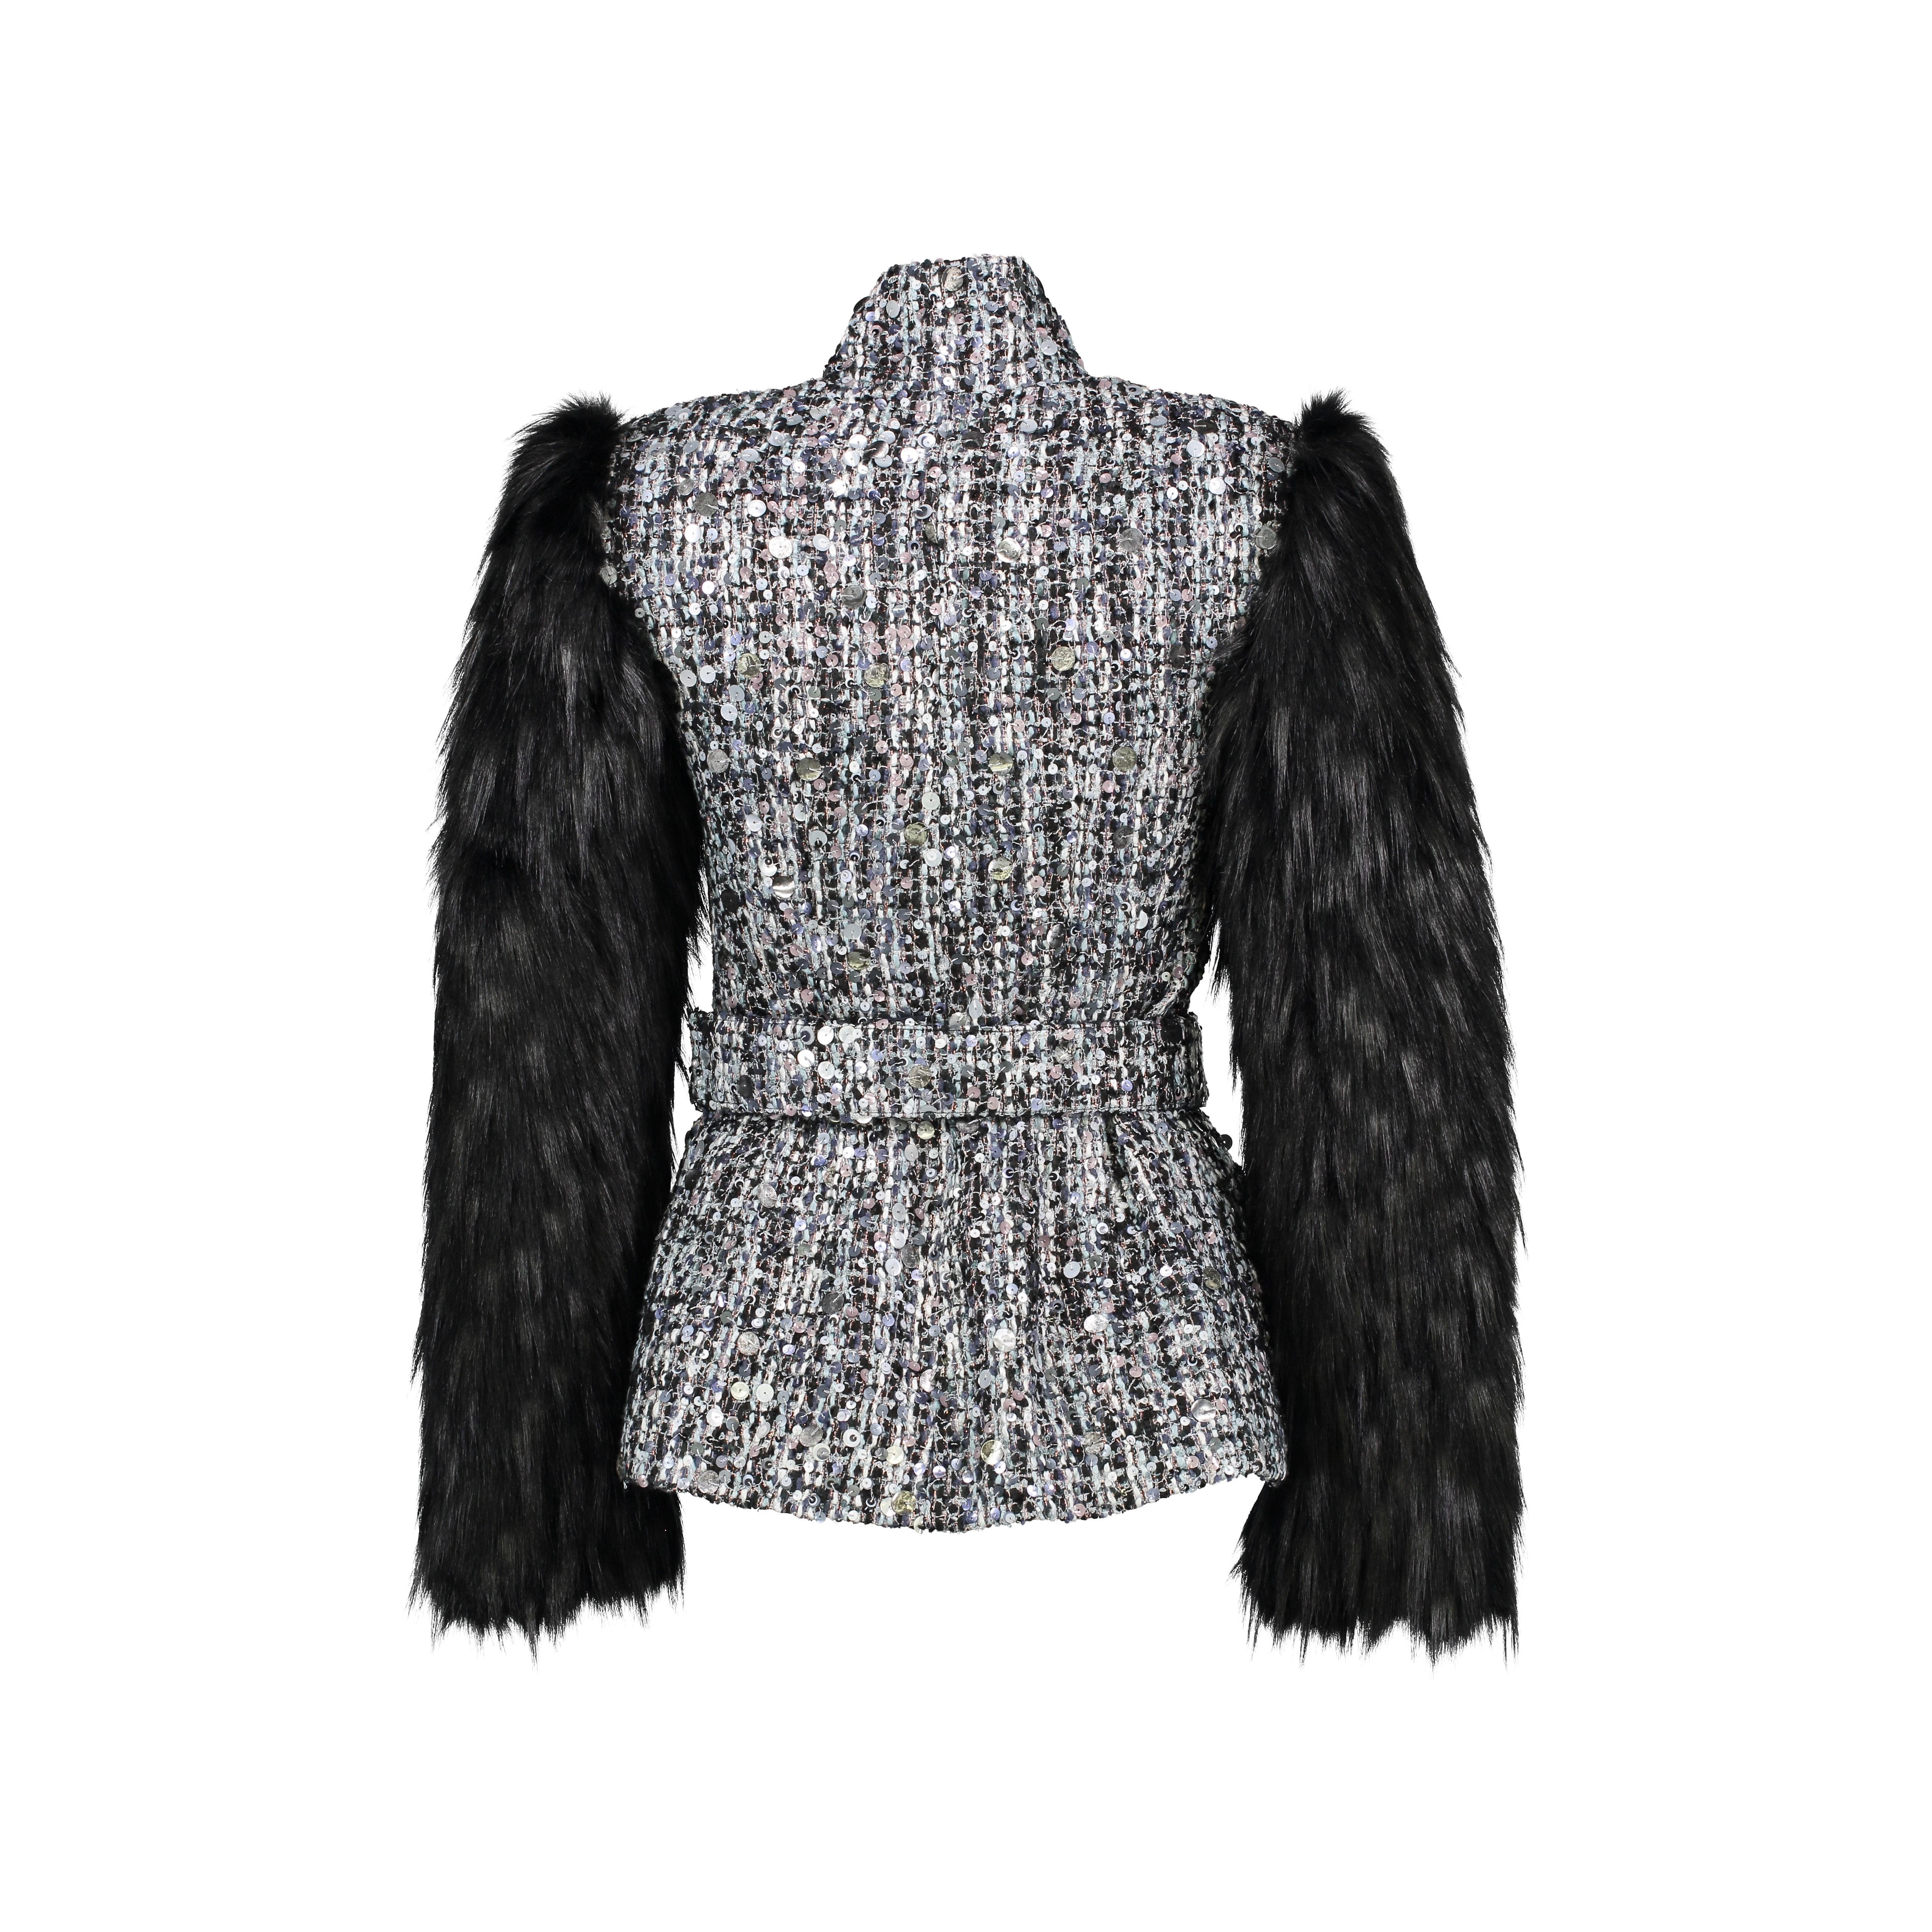 The Bridget Pelush black tweed jacket with sequins and faux fur fox sleeves is a one of a kind exclusive piece. The sophisticated Couture metallic tweed fabric features an intricate combination of sparkling iridescent sequins in black, silver,